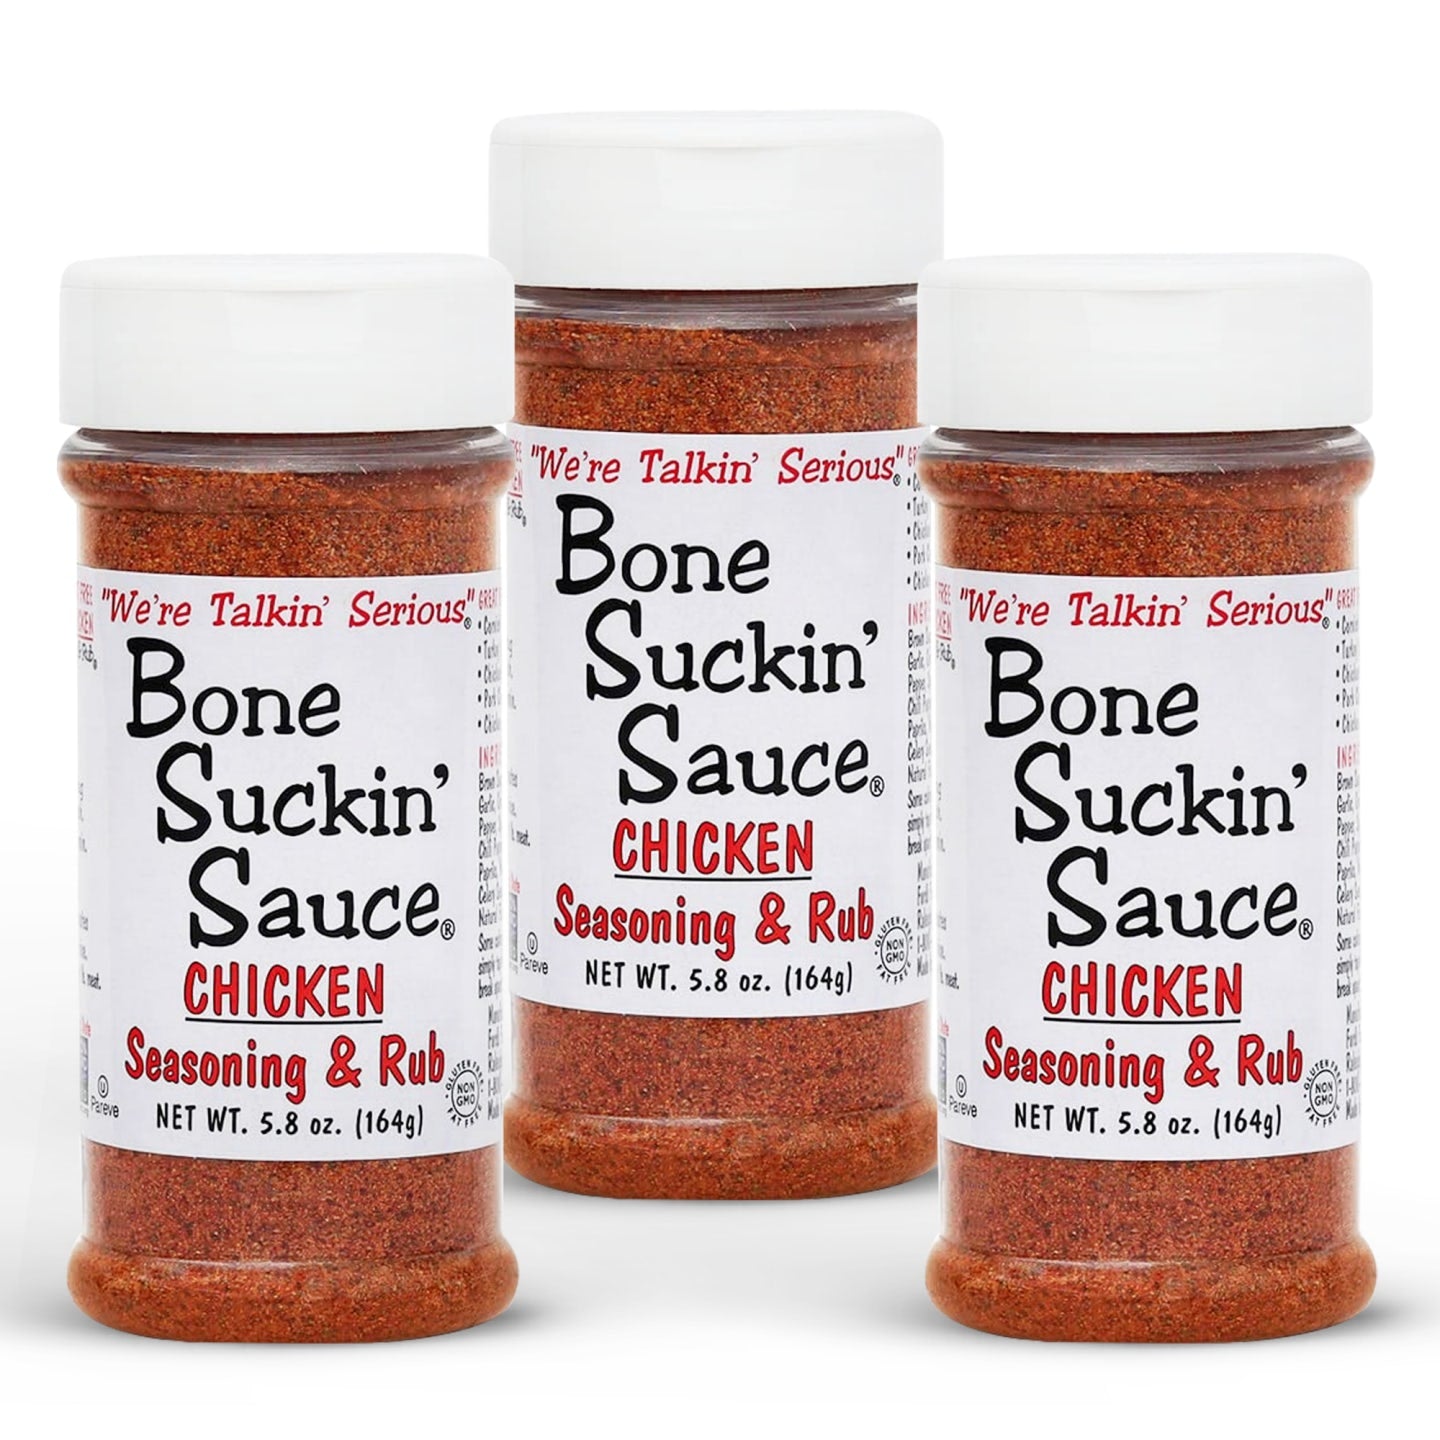 Bone Suckin'® Chicken Seasoning & Rub, 5.8 oz. A lighter blend of the brown sugar, paprika and spices found in the Original Seasoning & Rub, garlic and sage come to the forefront of our poultry blend. While it’s perfect on chicken, turkey, and fish, like our other seasoning & rub products, it’s versatile enough to be used on just about anything. 3 pack